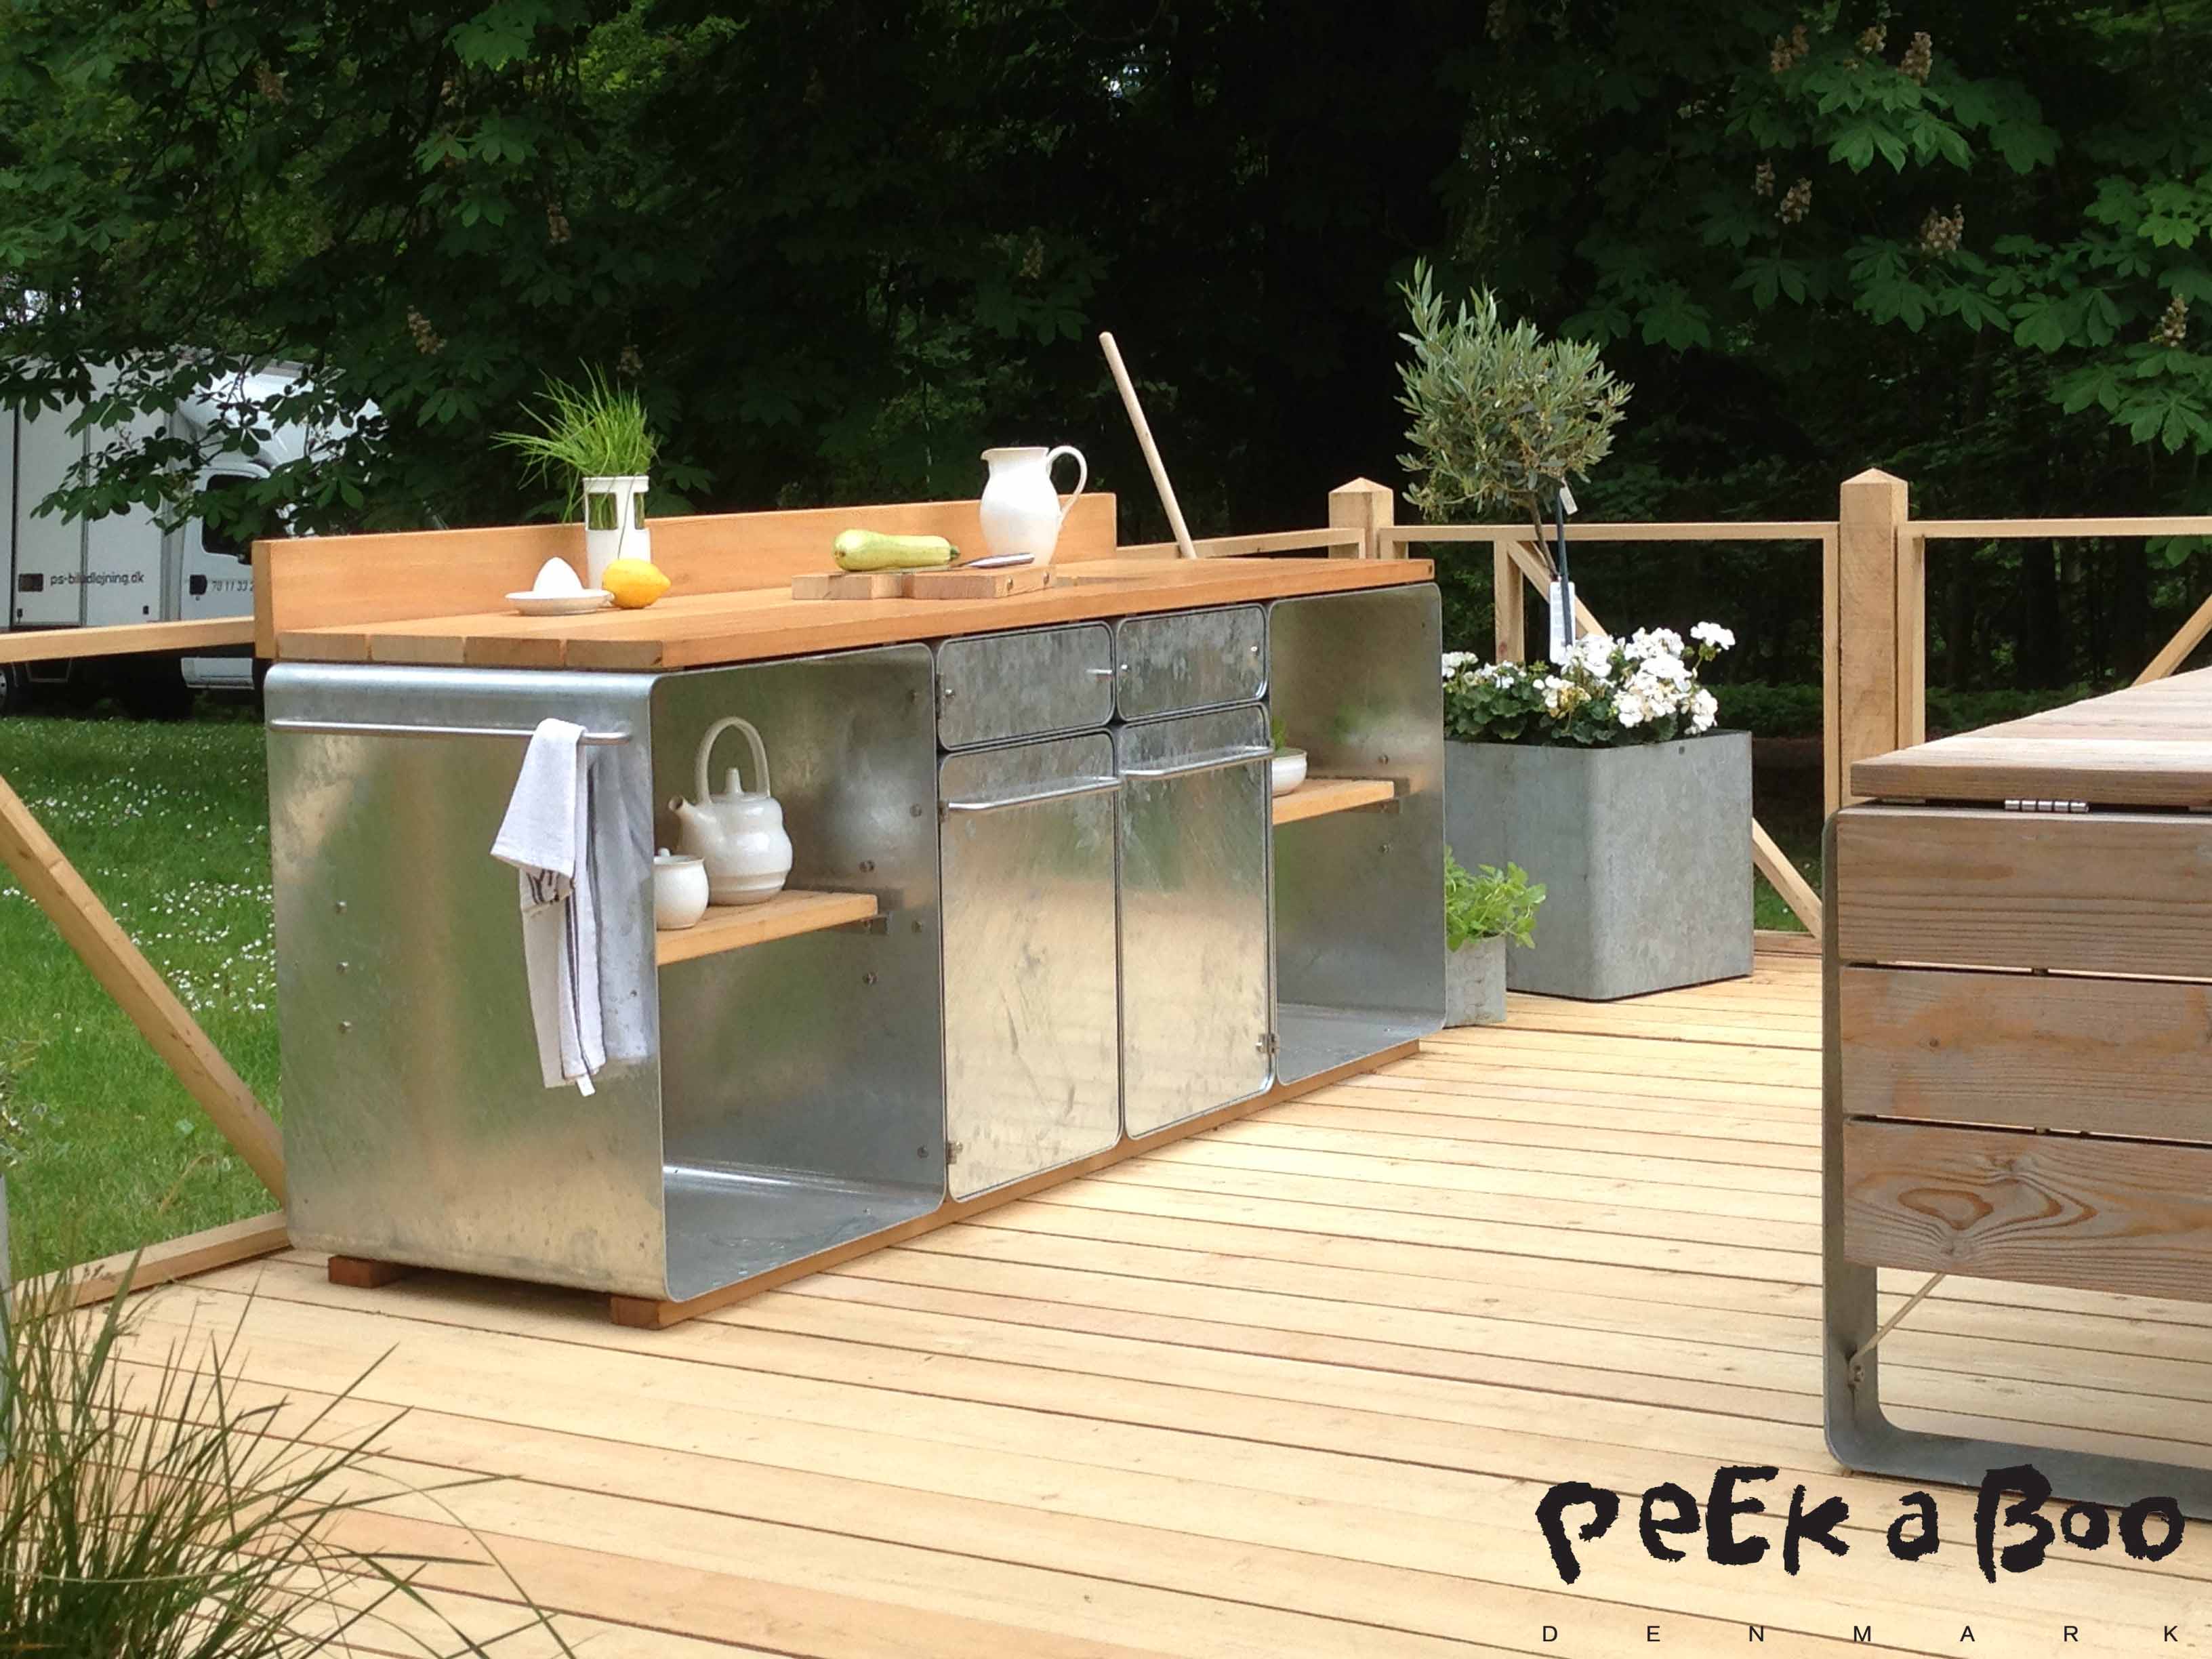 Outdoor kitchen from OUTSIDE design. danish design at it's best.